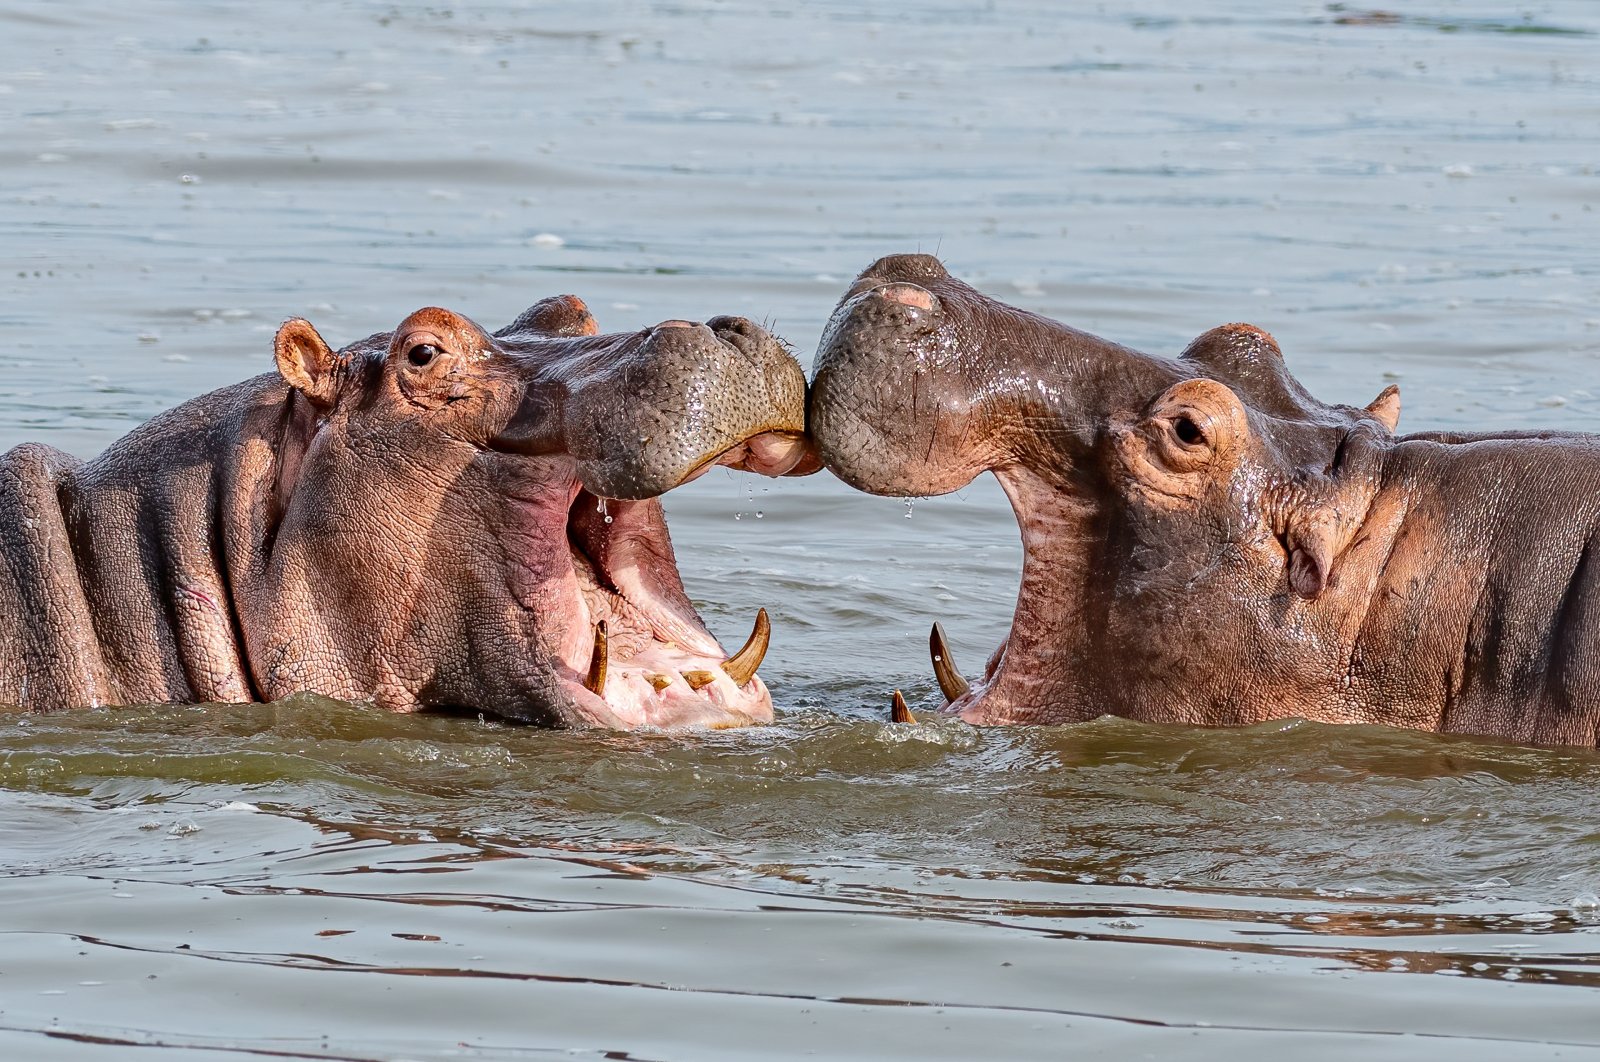 Two young hippopotami (Hippopotamus amphibius), hippos with wide open mouths play in Queen Elizabeth National Park, Uganda, Africa. (Shutterstock Photo)